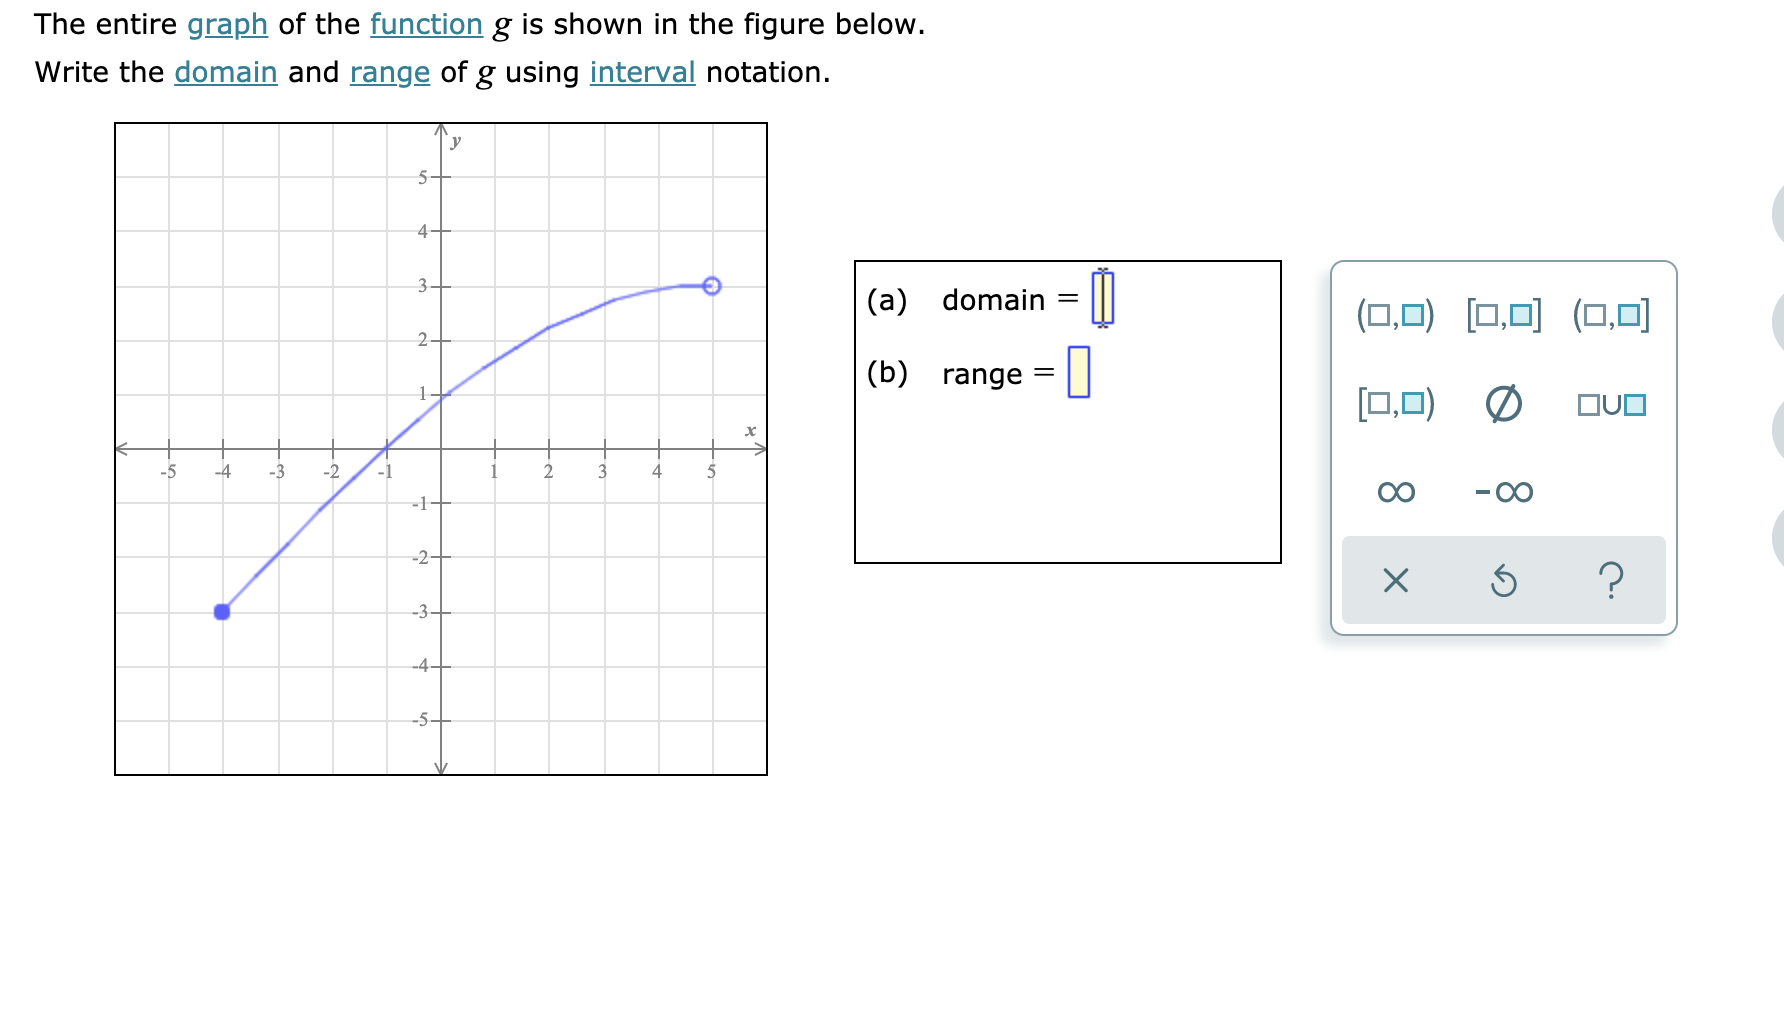 The entire graph of the function g is shown in the figure below.
Write the domain and range of g using interval notation
4+
3-
(a) domain
(O (,
2
(b) range
1
OUD
-4
4
-2
-1--
-2-
?
X
3
4
-5
